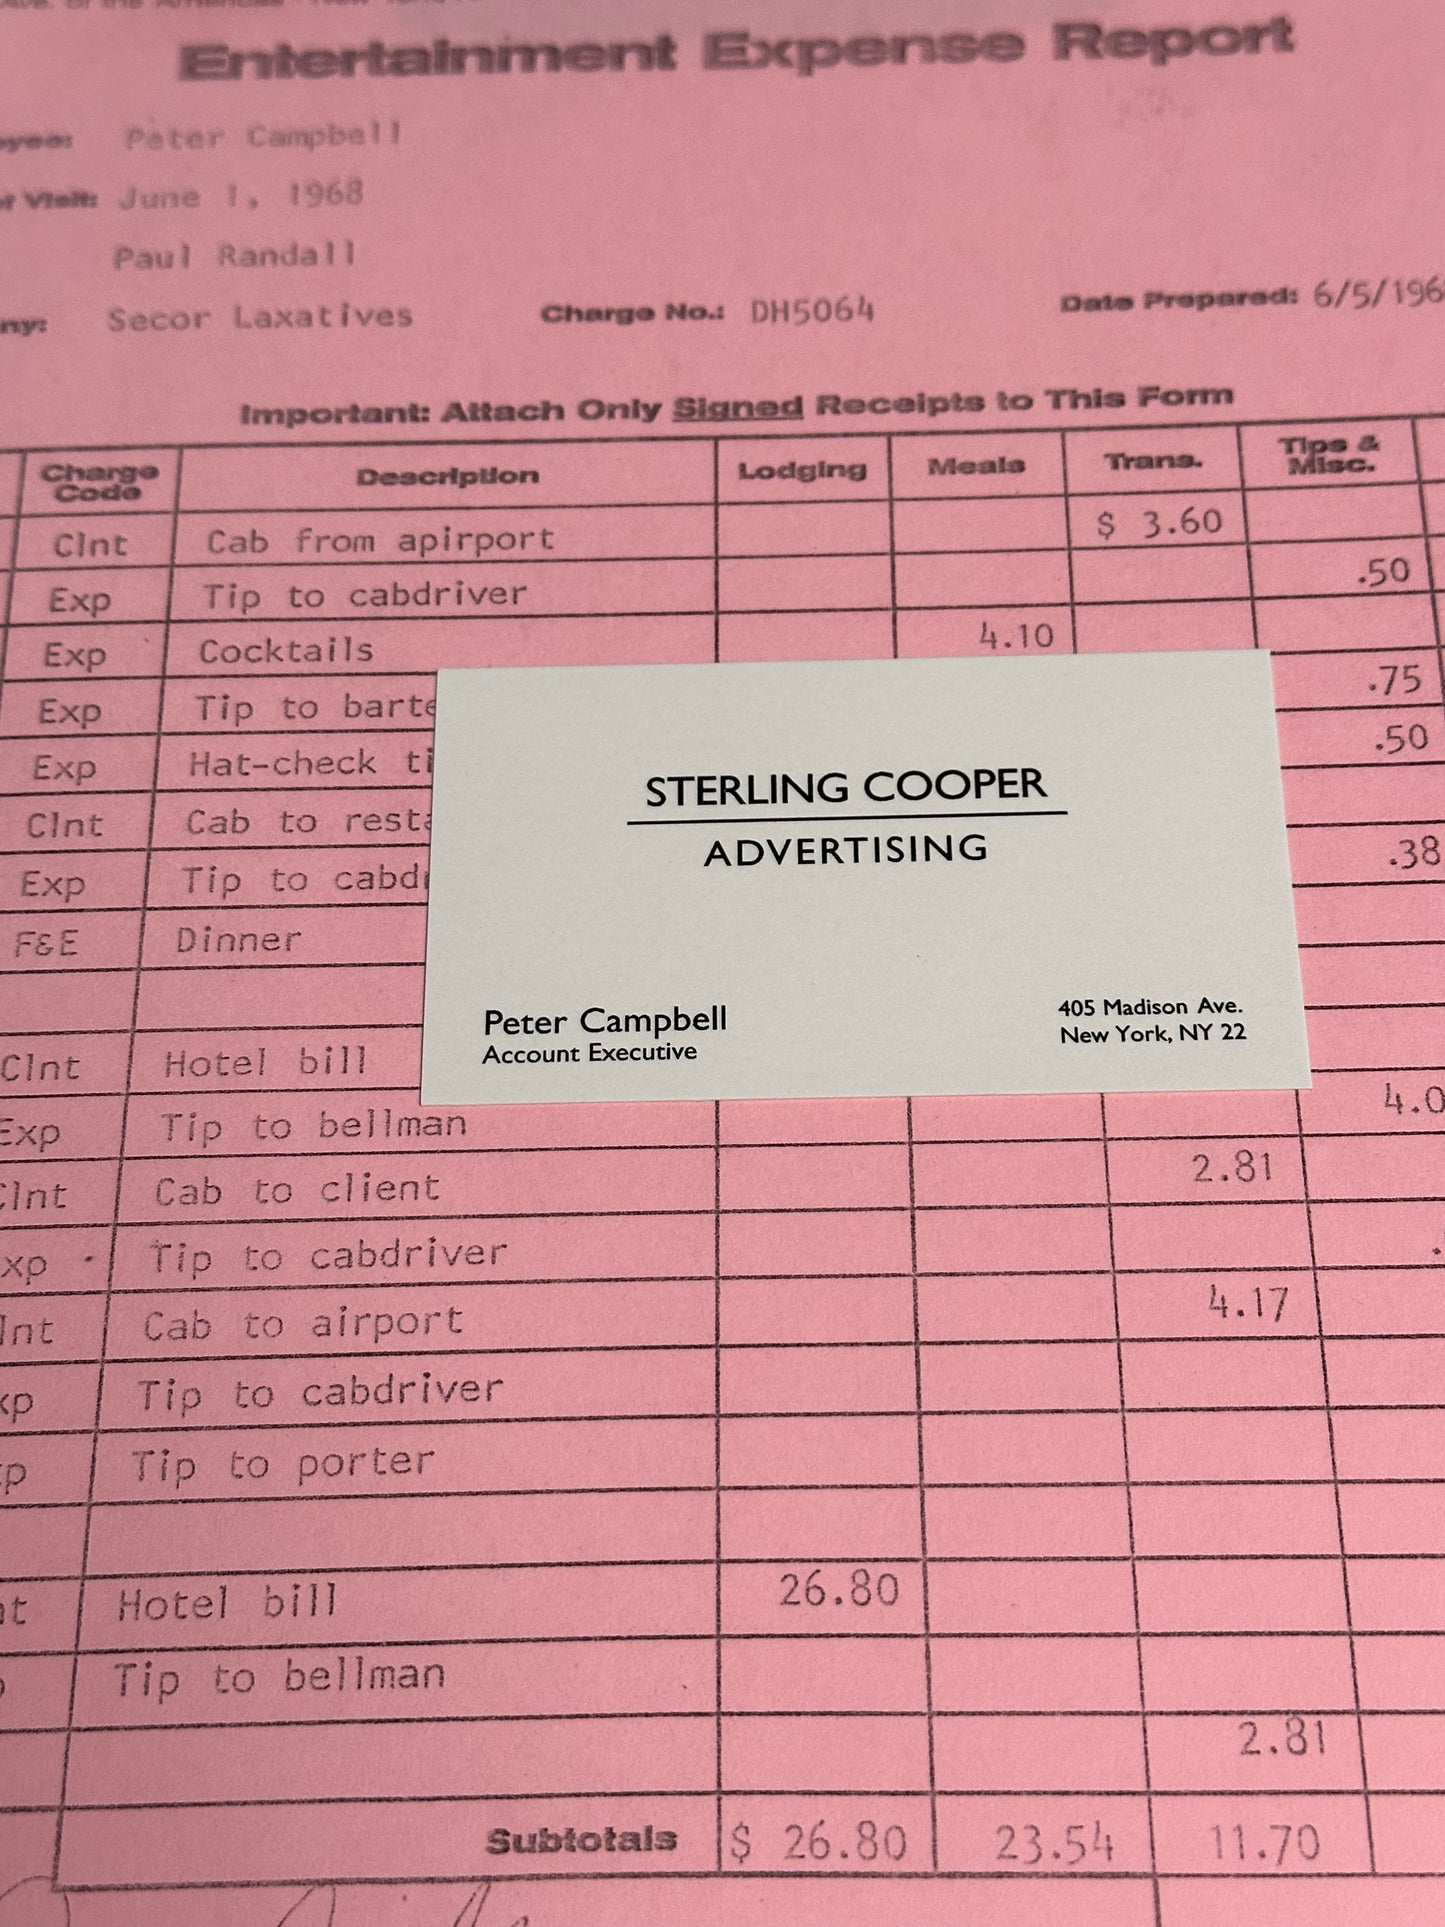 MAD MEN: Pete Campbell Sterling Cooper & Partners SECOR LAXITIVES Company Expense Report